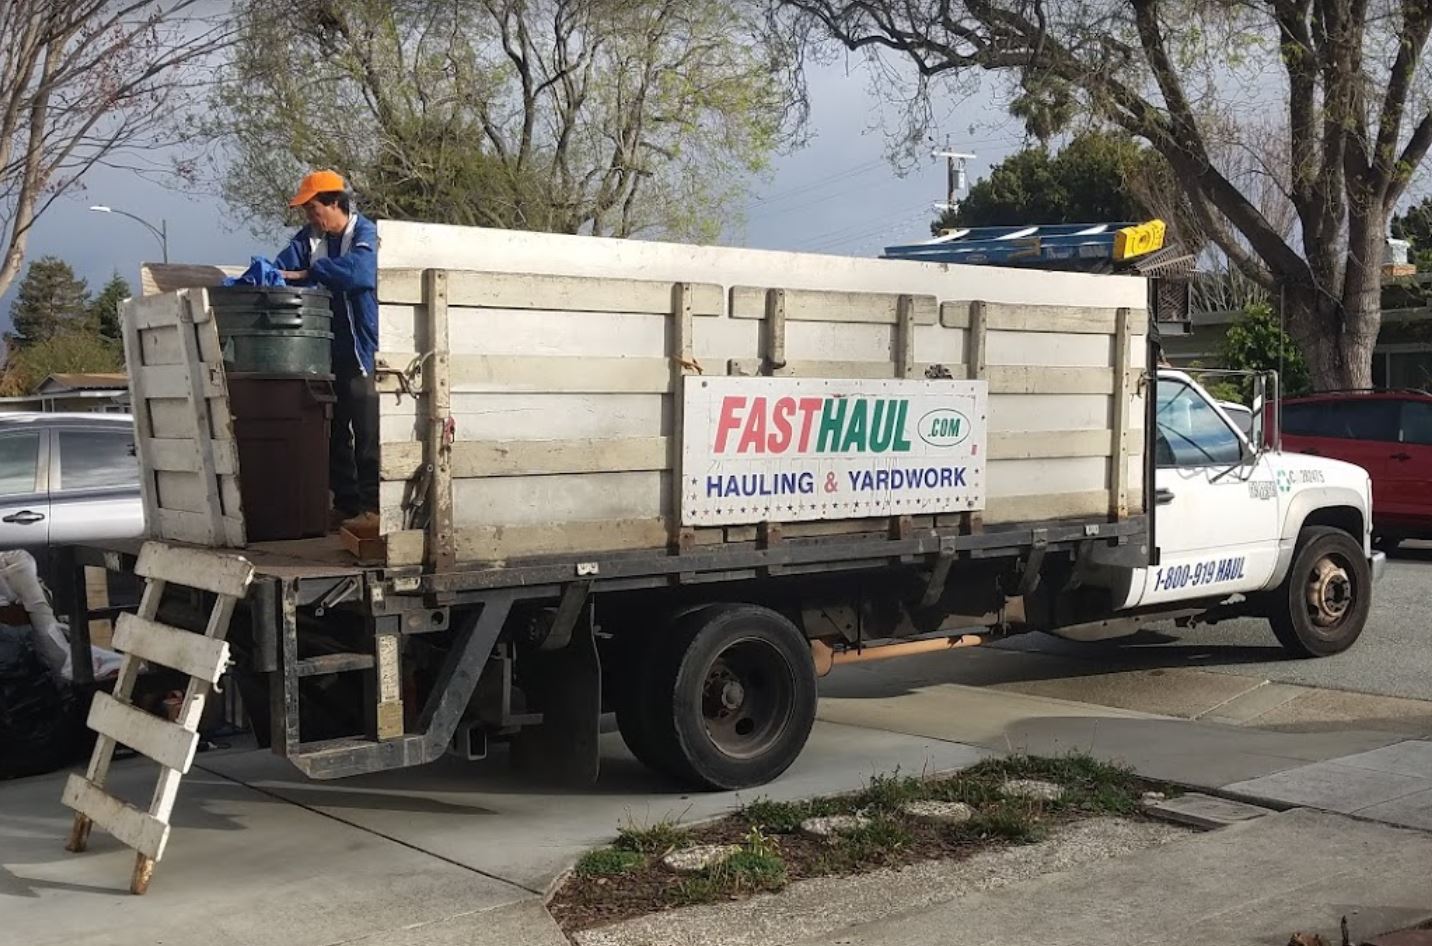 fast haul at work in walnut creek removing unwanted junk